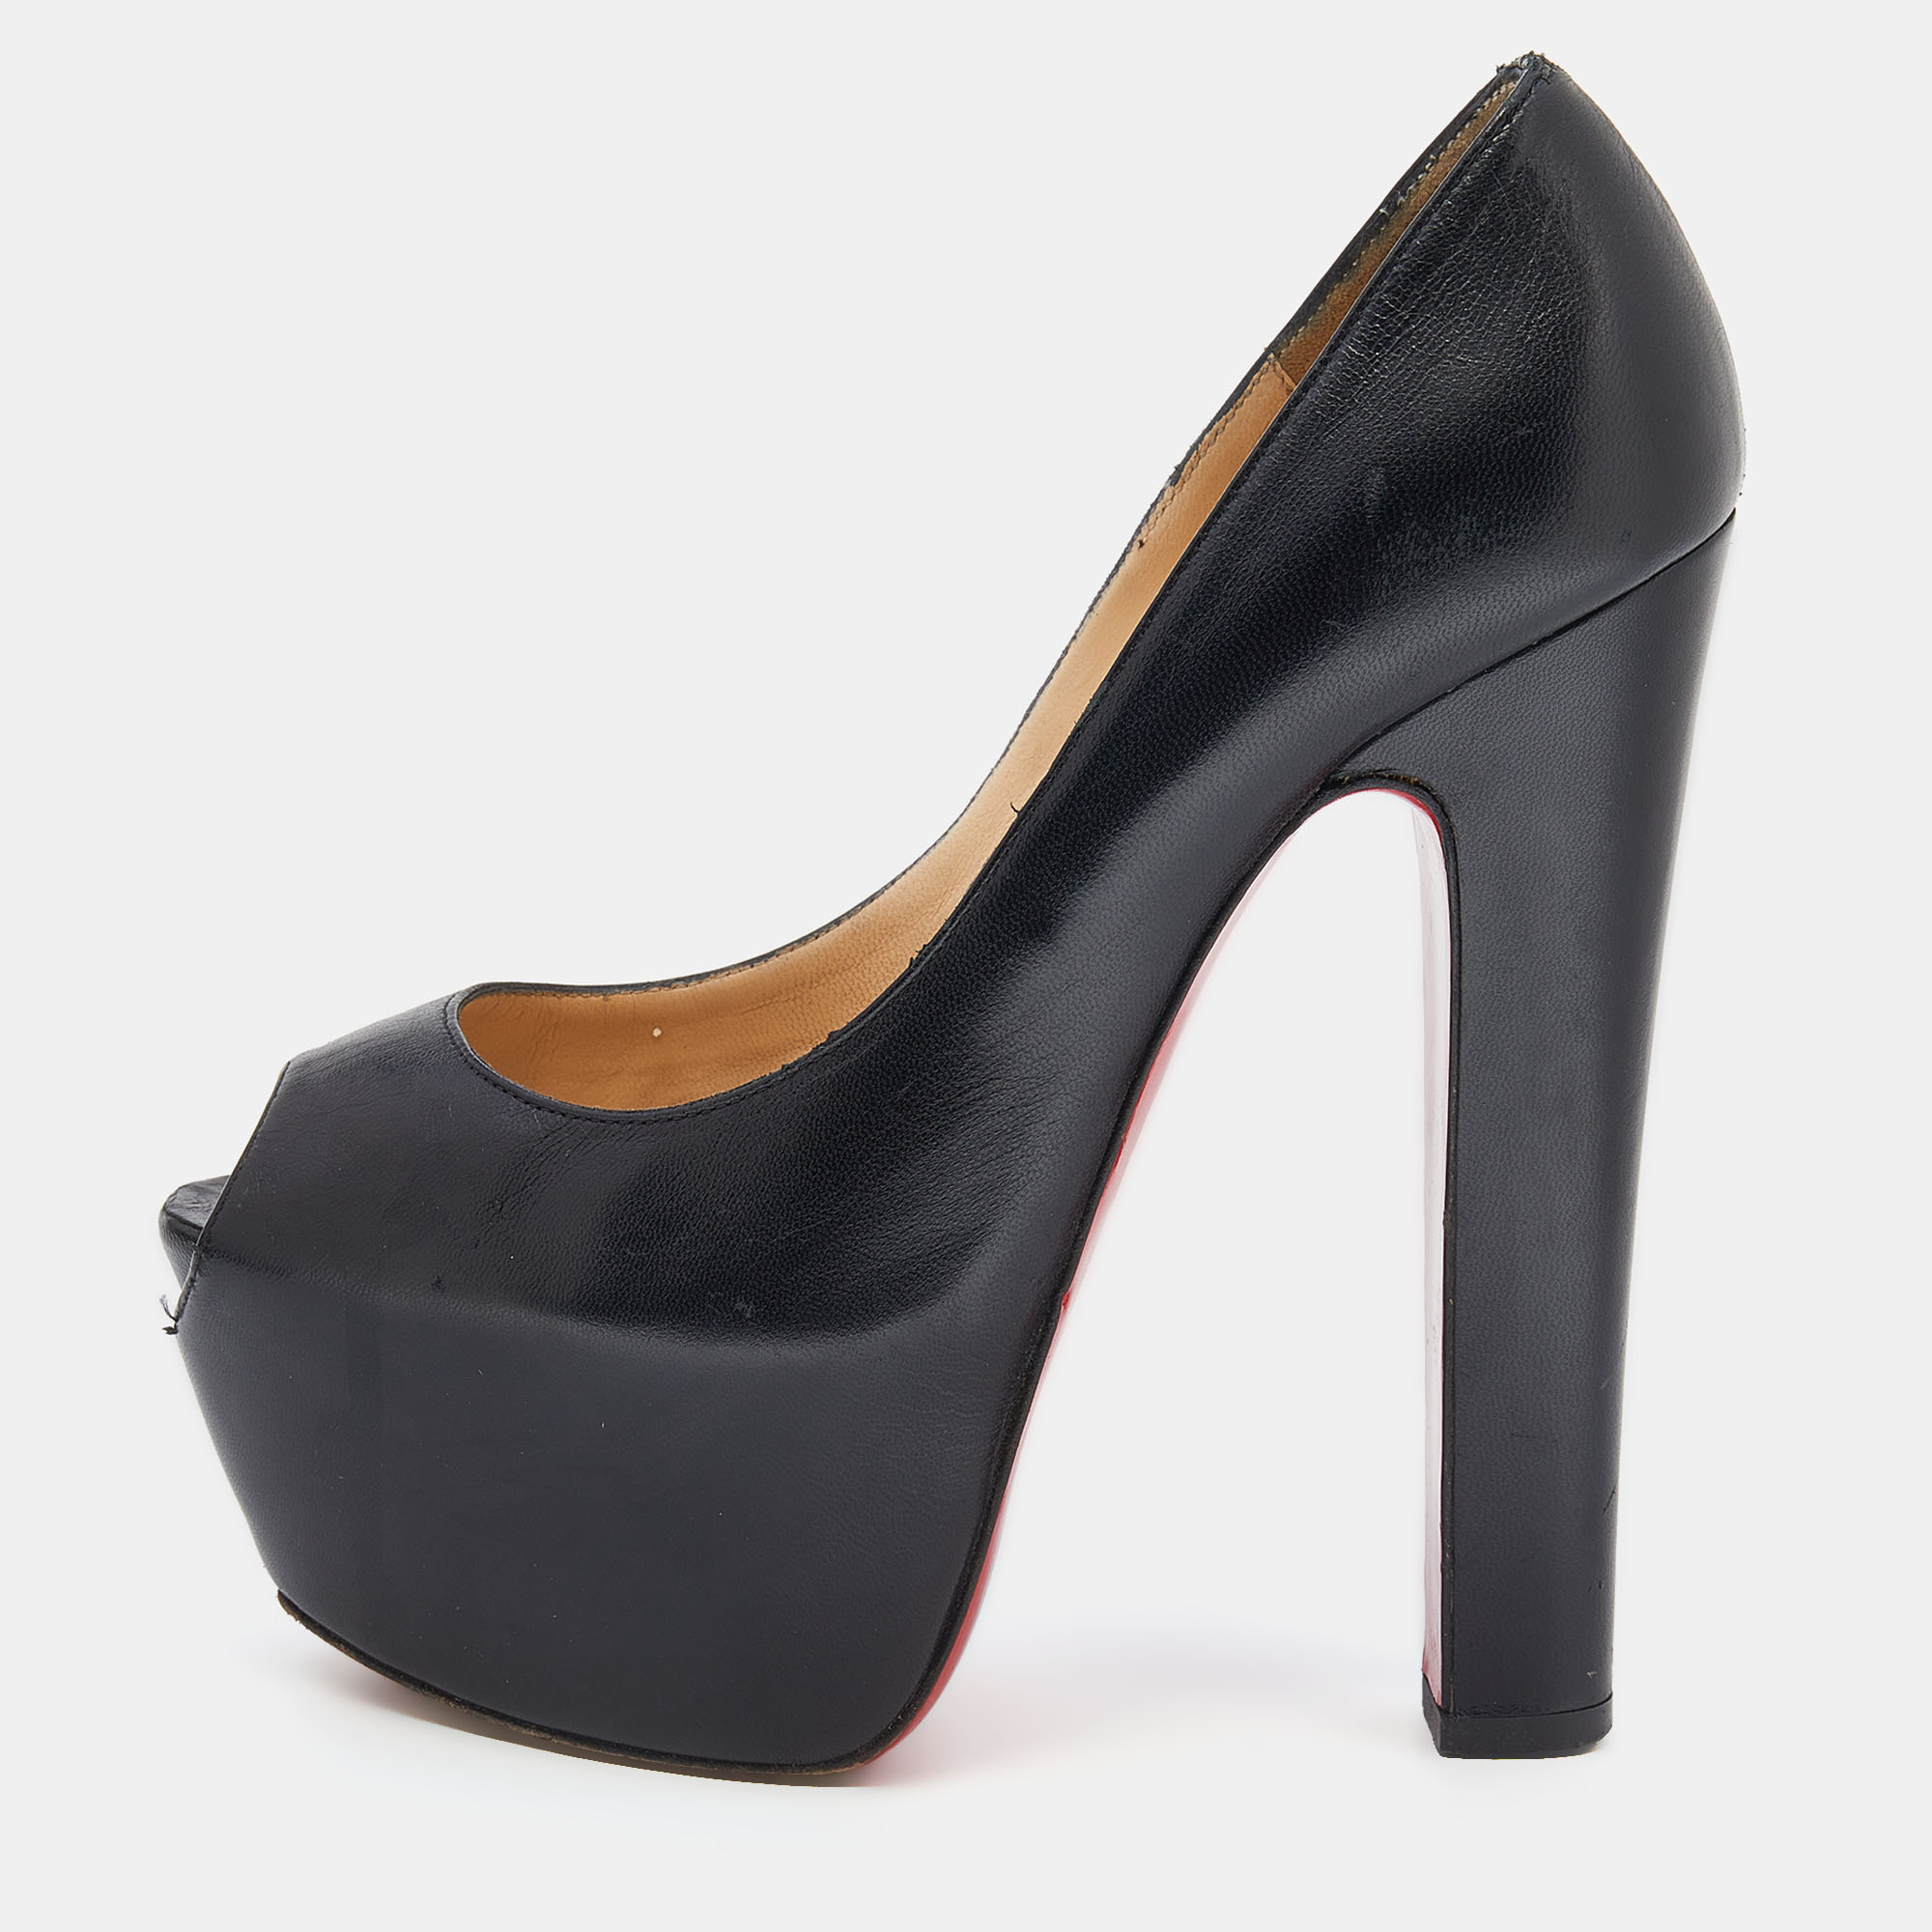 Pre-owned Christian Louboutin Black Leather Highness Peep Toe Platform Pumps Size 37